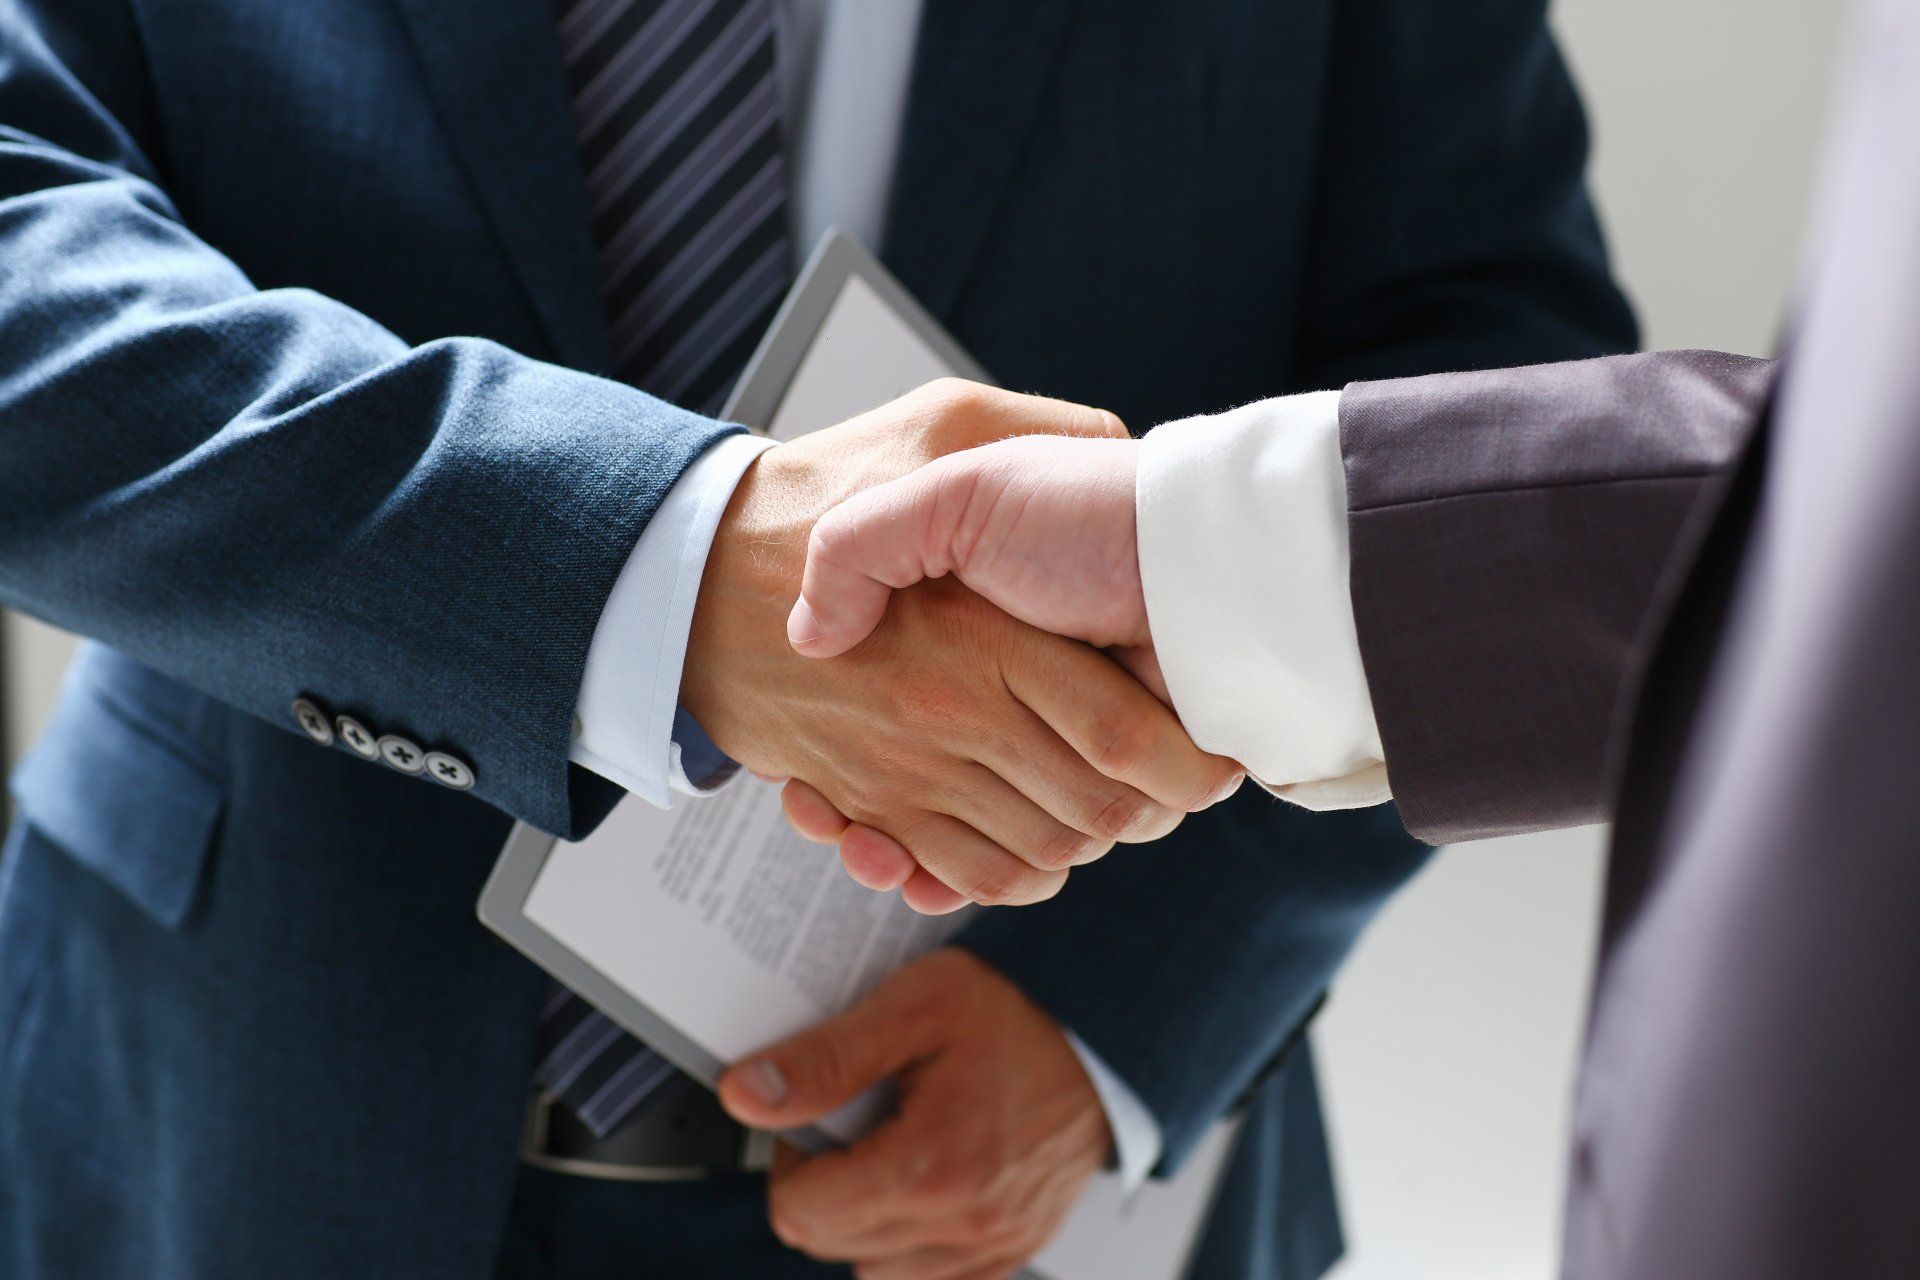 close-up view of 2 people wearing suits shaking hands